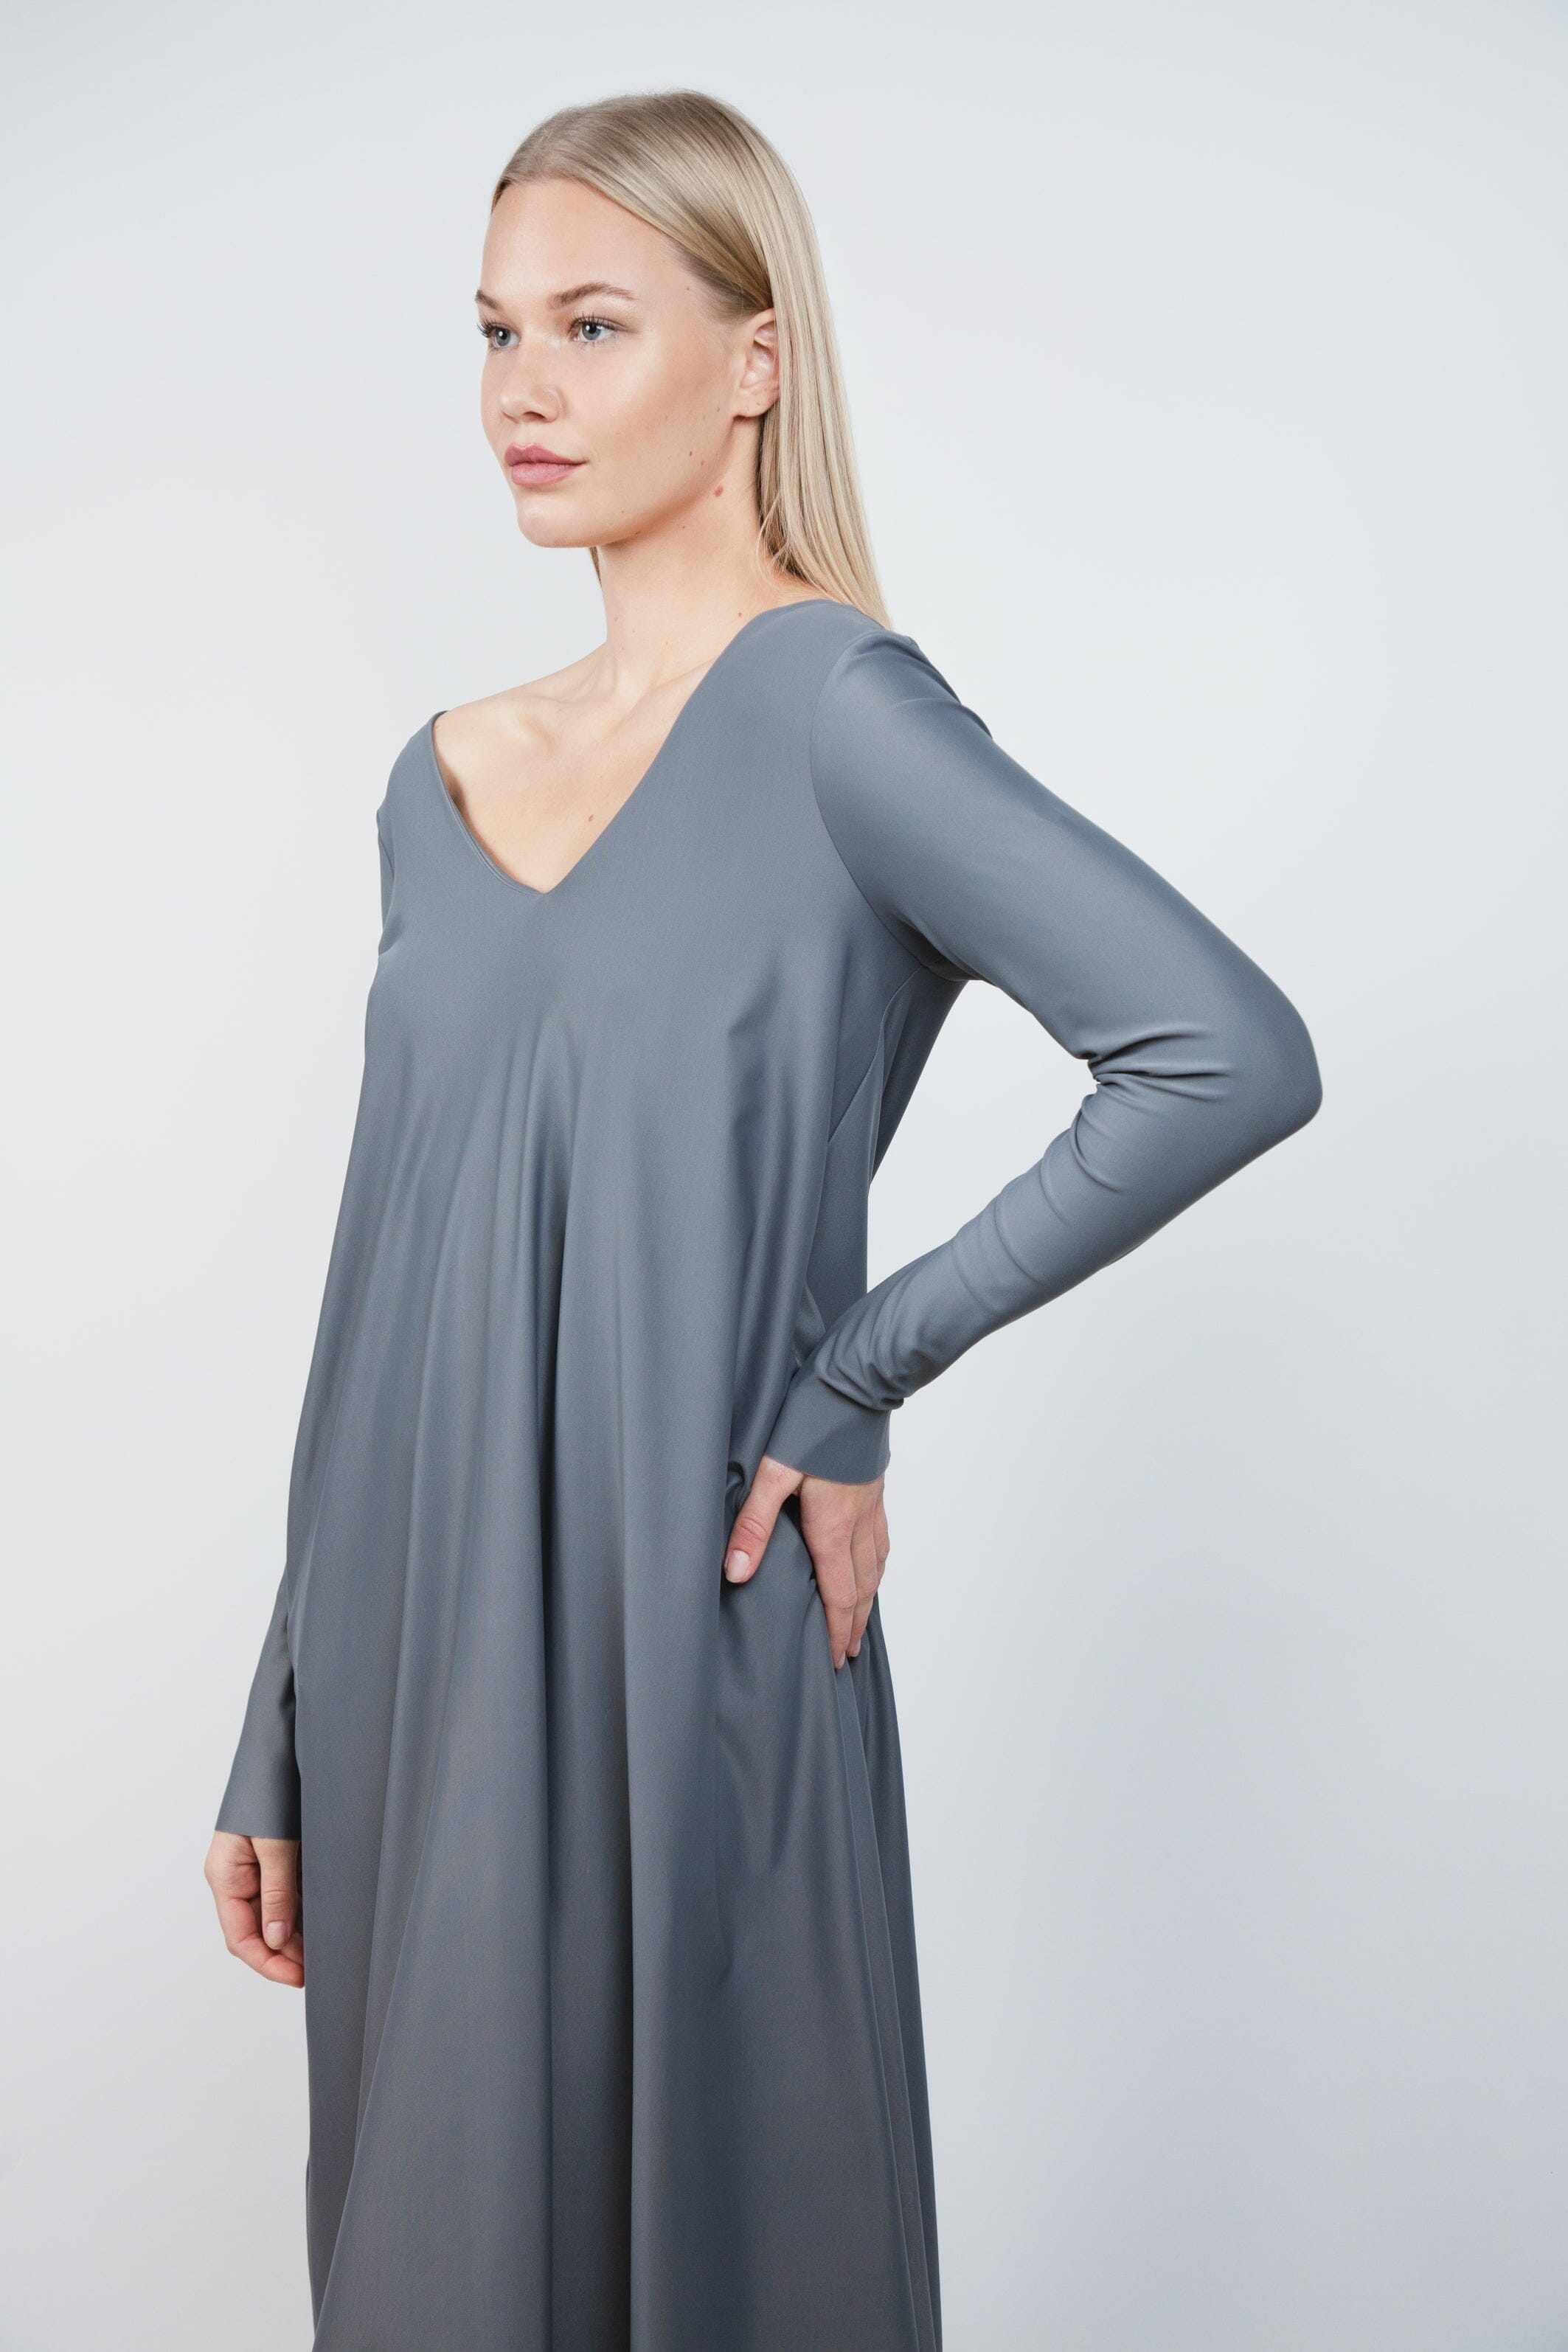  Garden of Dreams Dress Light Grey Product Amoralle